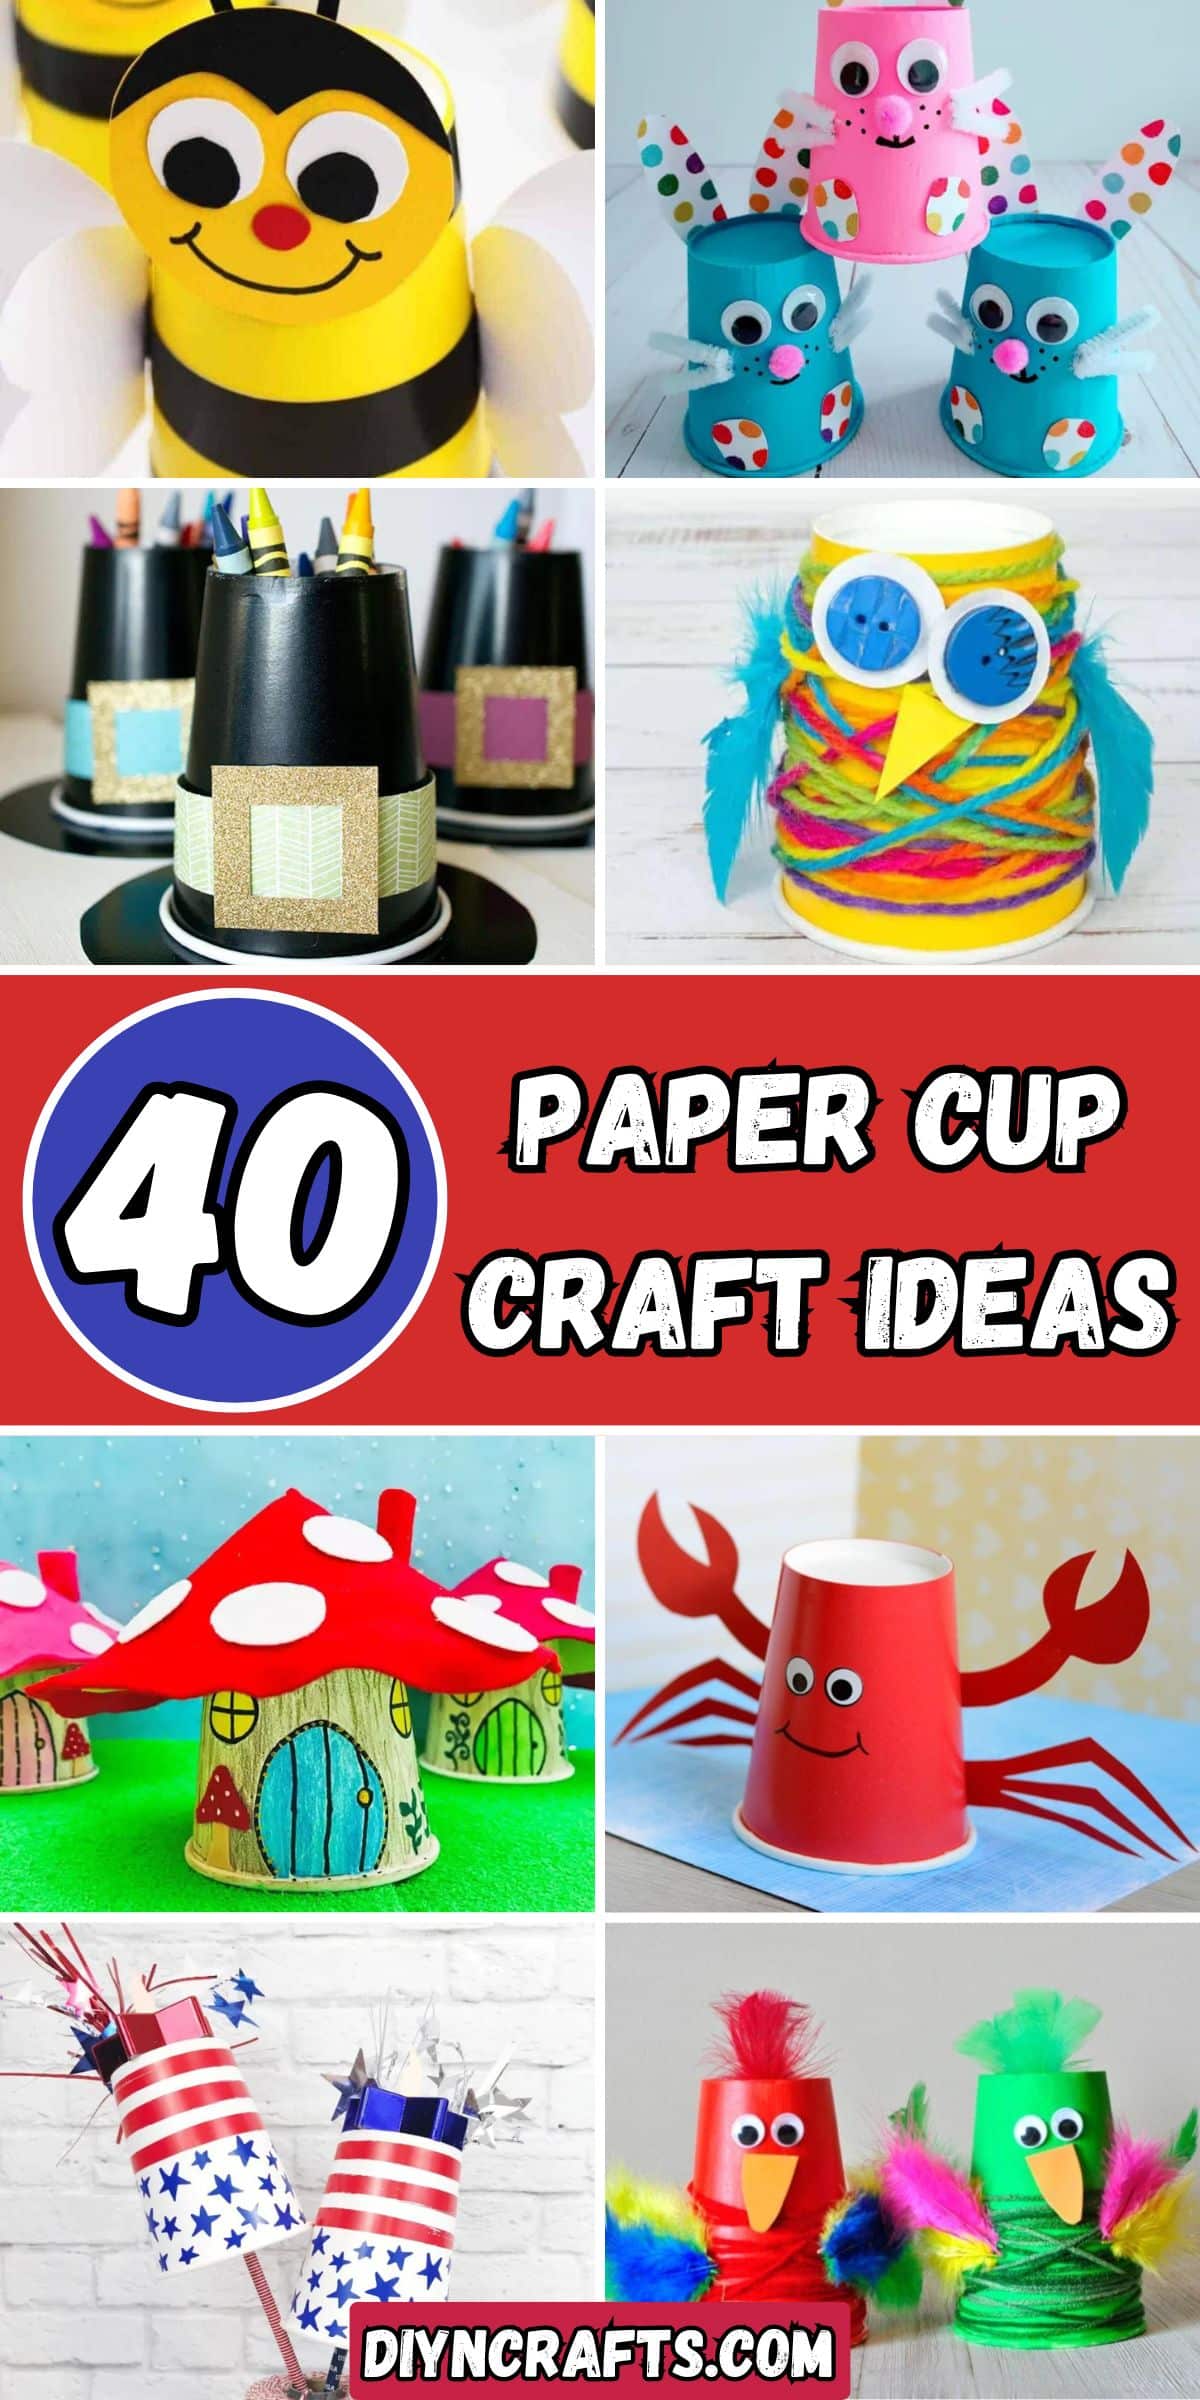 40 Paper Cup Craft Ideas collage.